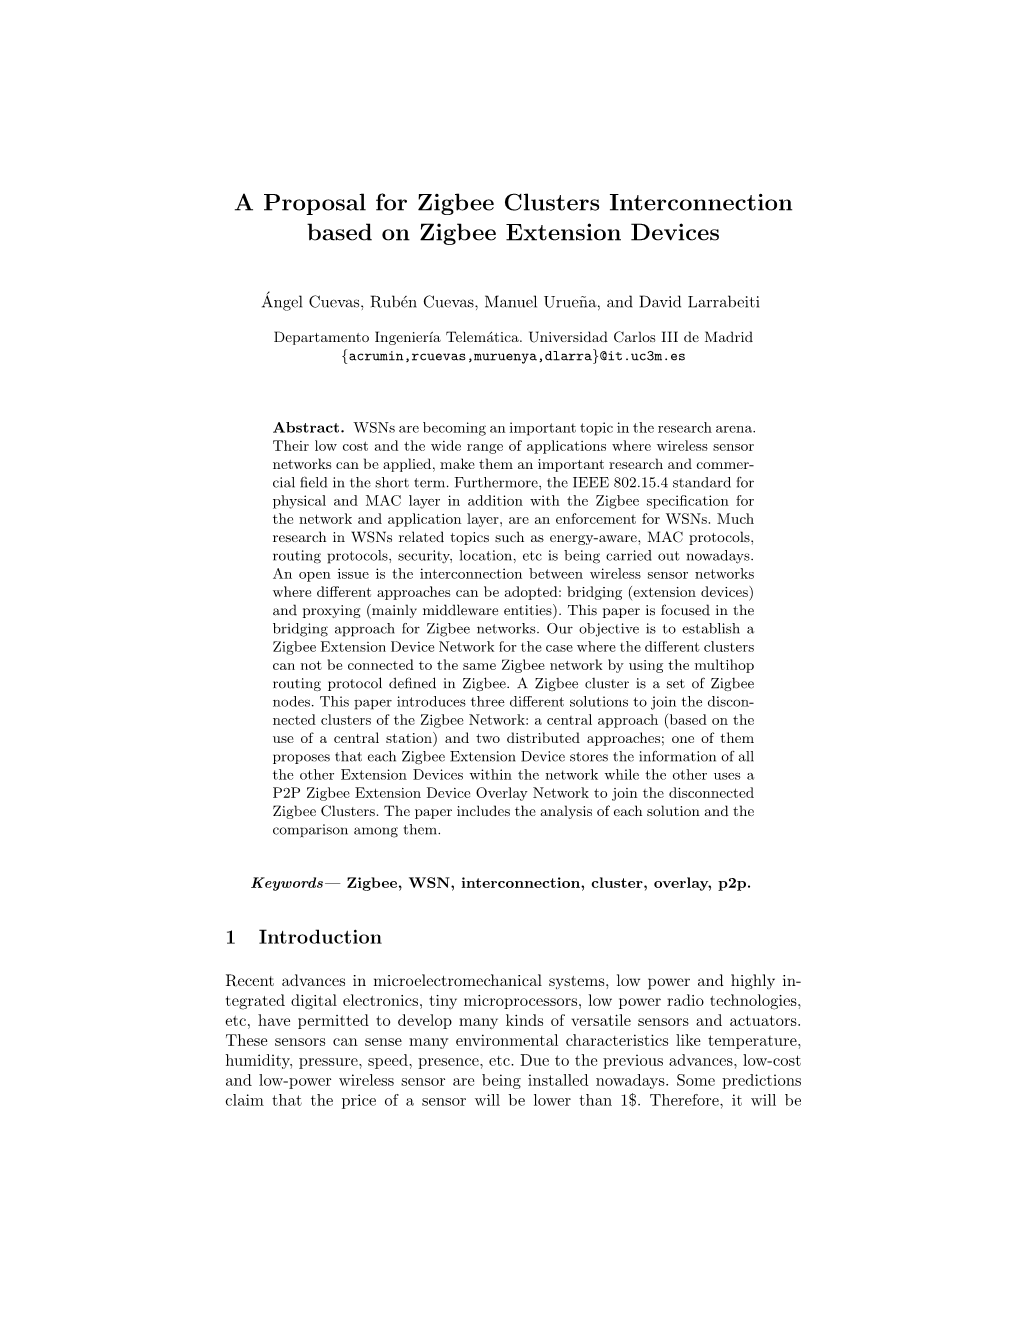 A Proposal for Zigbee Clusters Interconnection Based on Zigbee Extension Devices